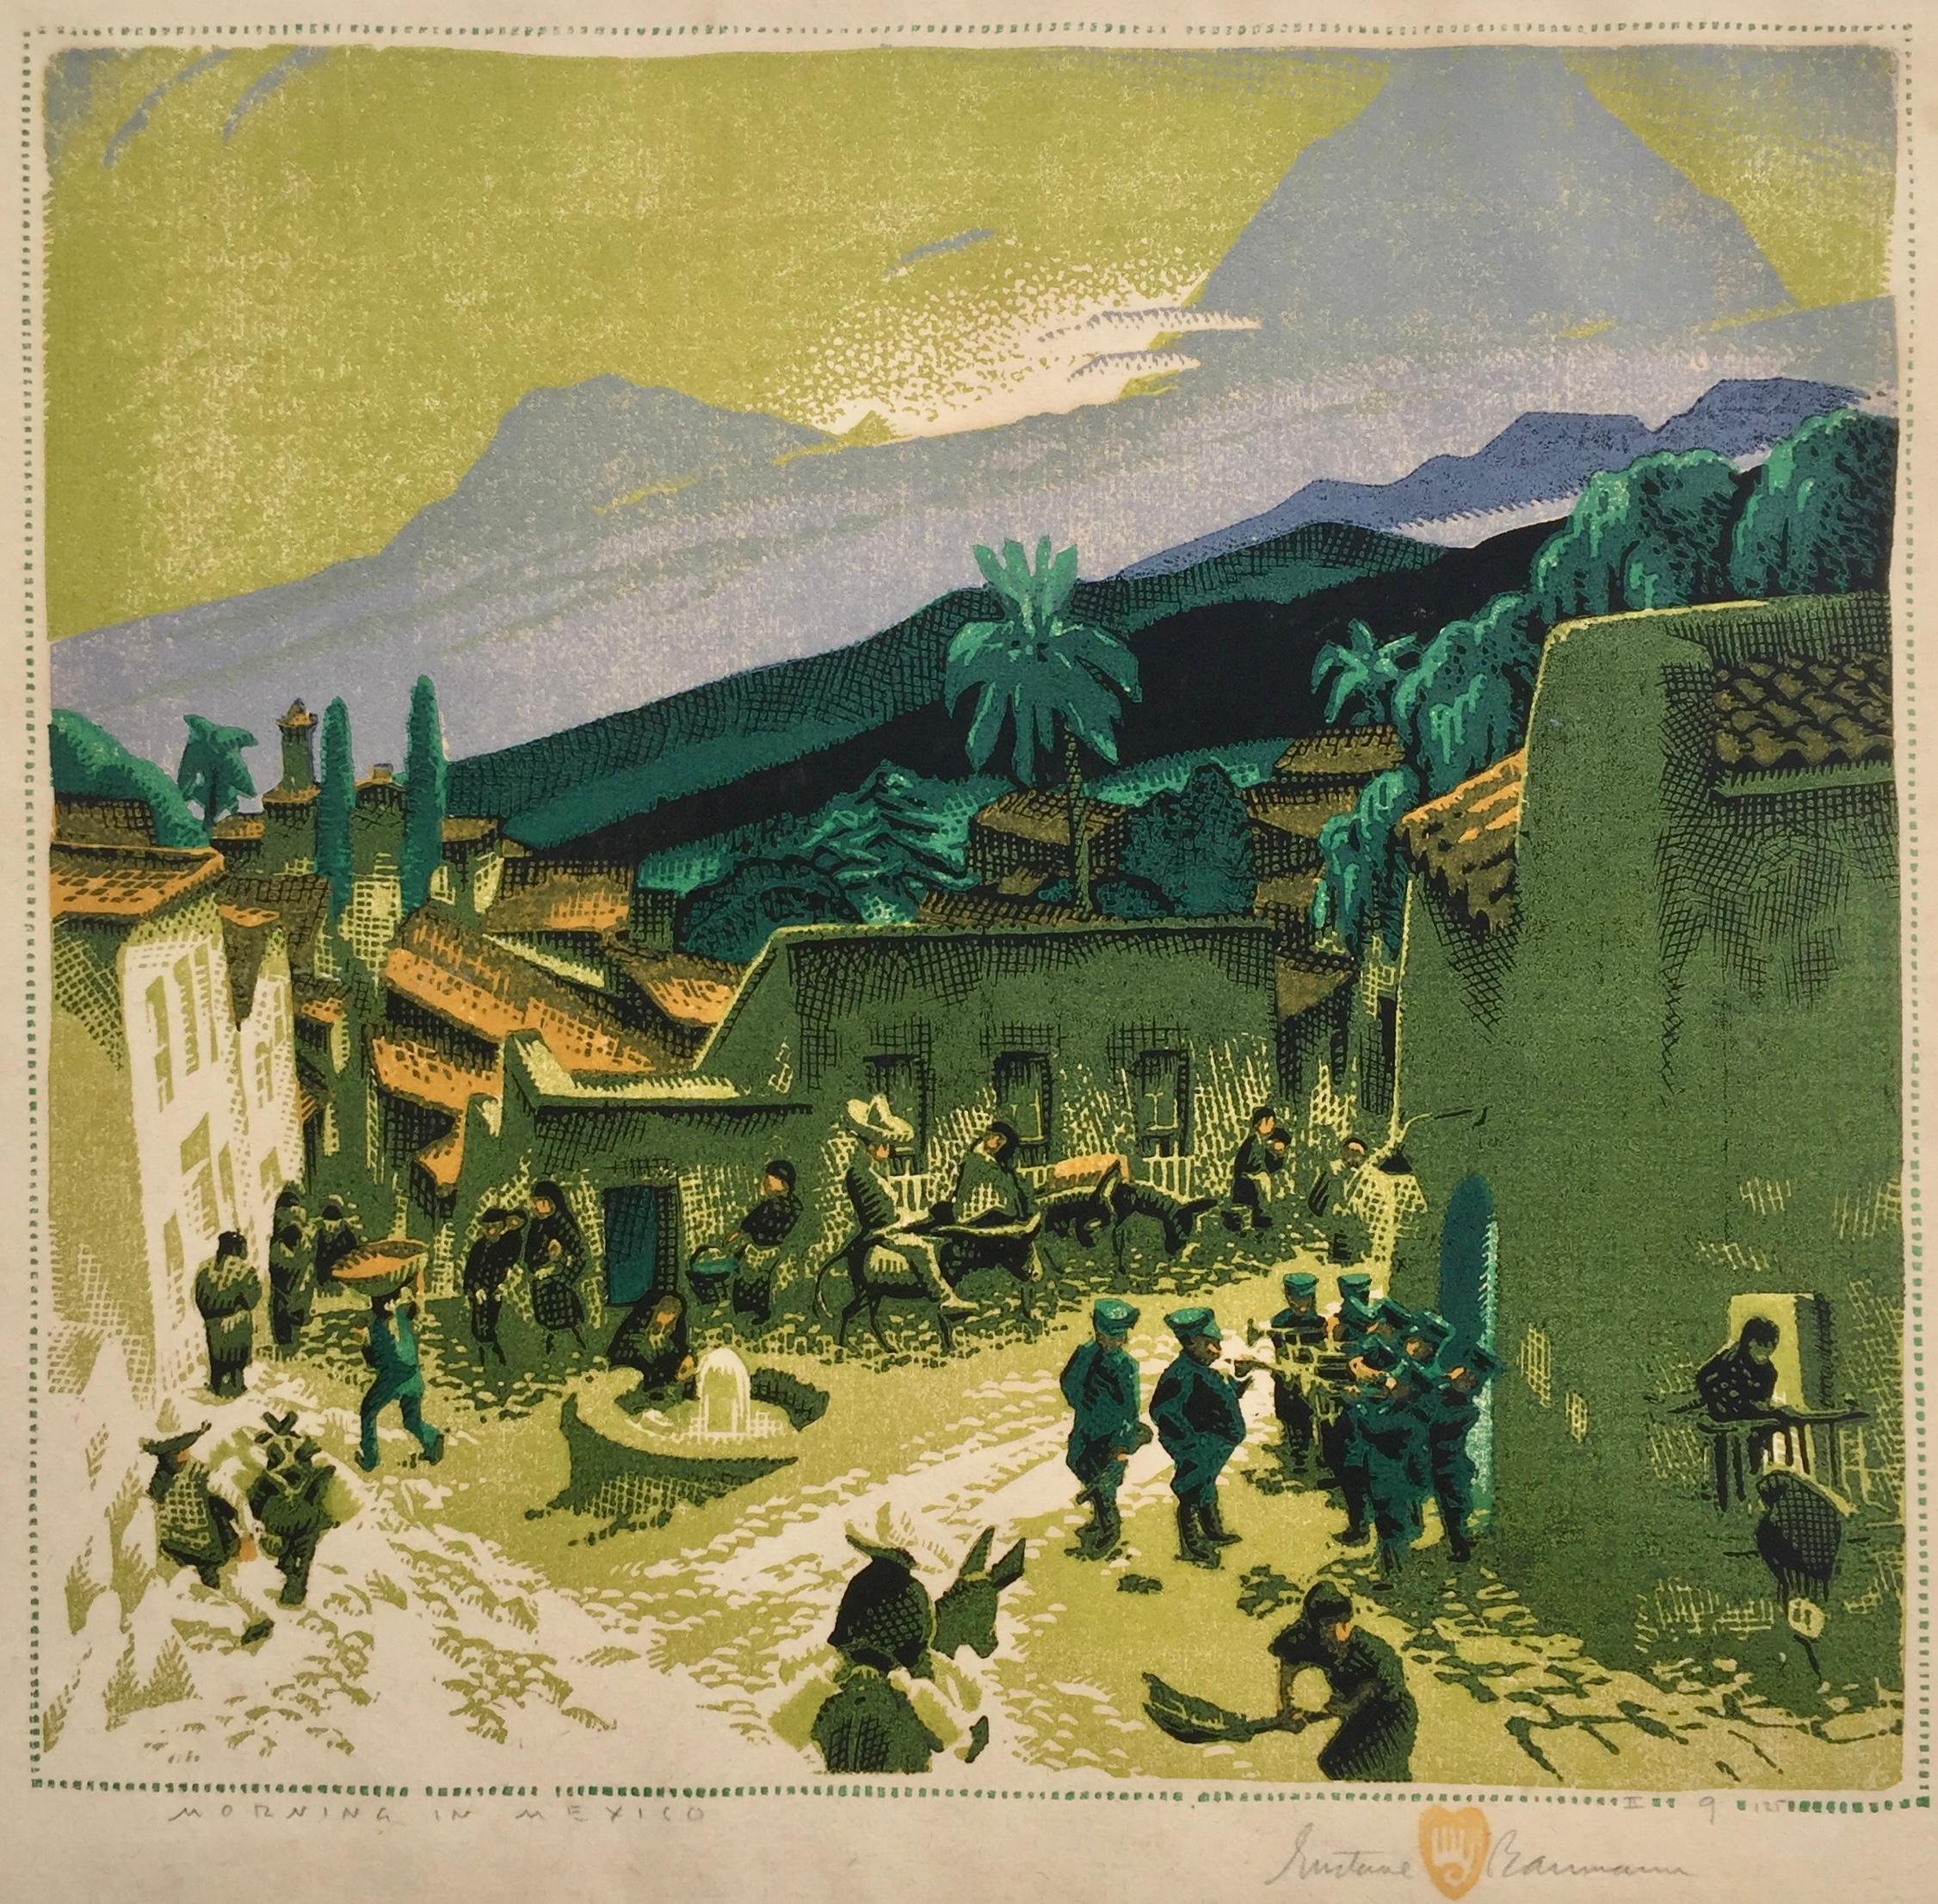 GUSTAVE BAUMANN (1881 -1971)

MORNING IN MEXICO 1934-36 (Chamberlain 143)
Color woodcut, 2nd version after Baumann discarded the first blocks. This version 1936.
POSSIBLY AN UNIQUE VARIANT IMPRESSION. DIFFERS FORM THE IMAGE IN THE CATALOG RAISONNE.